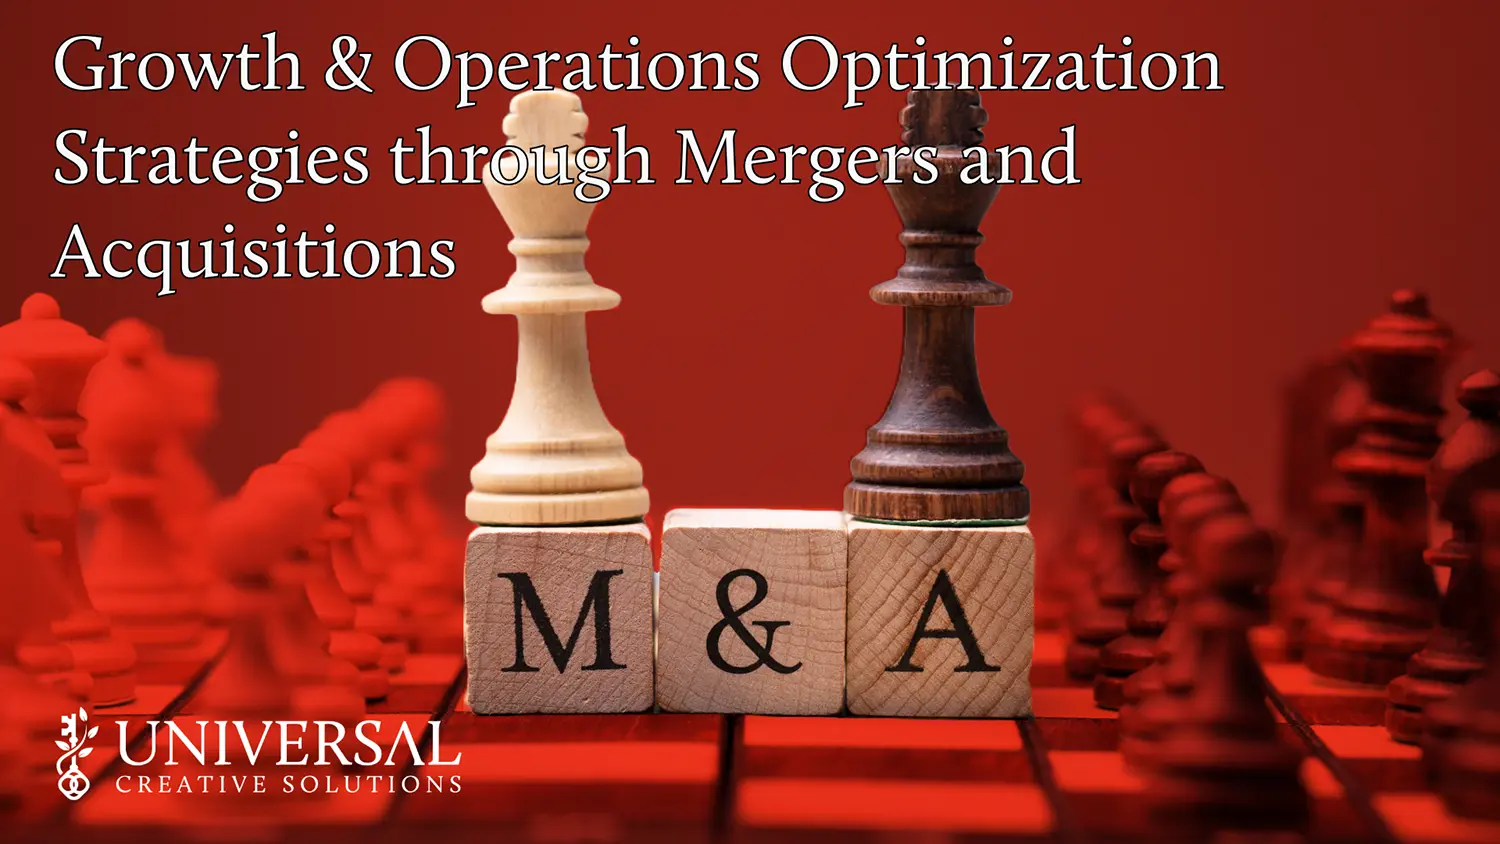 Growth & Operations Optimization Strategies through Mergers and Acquisitions